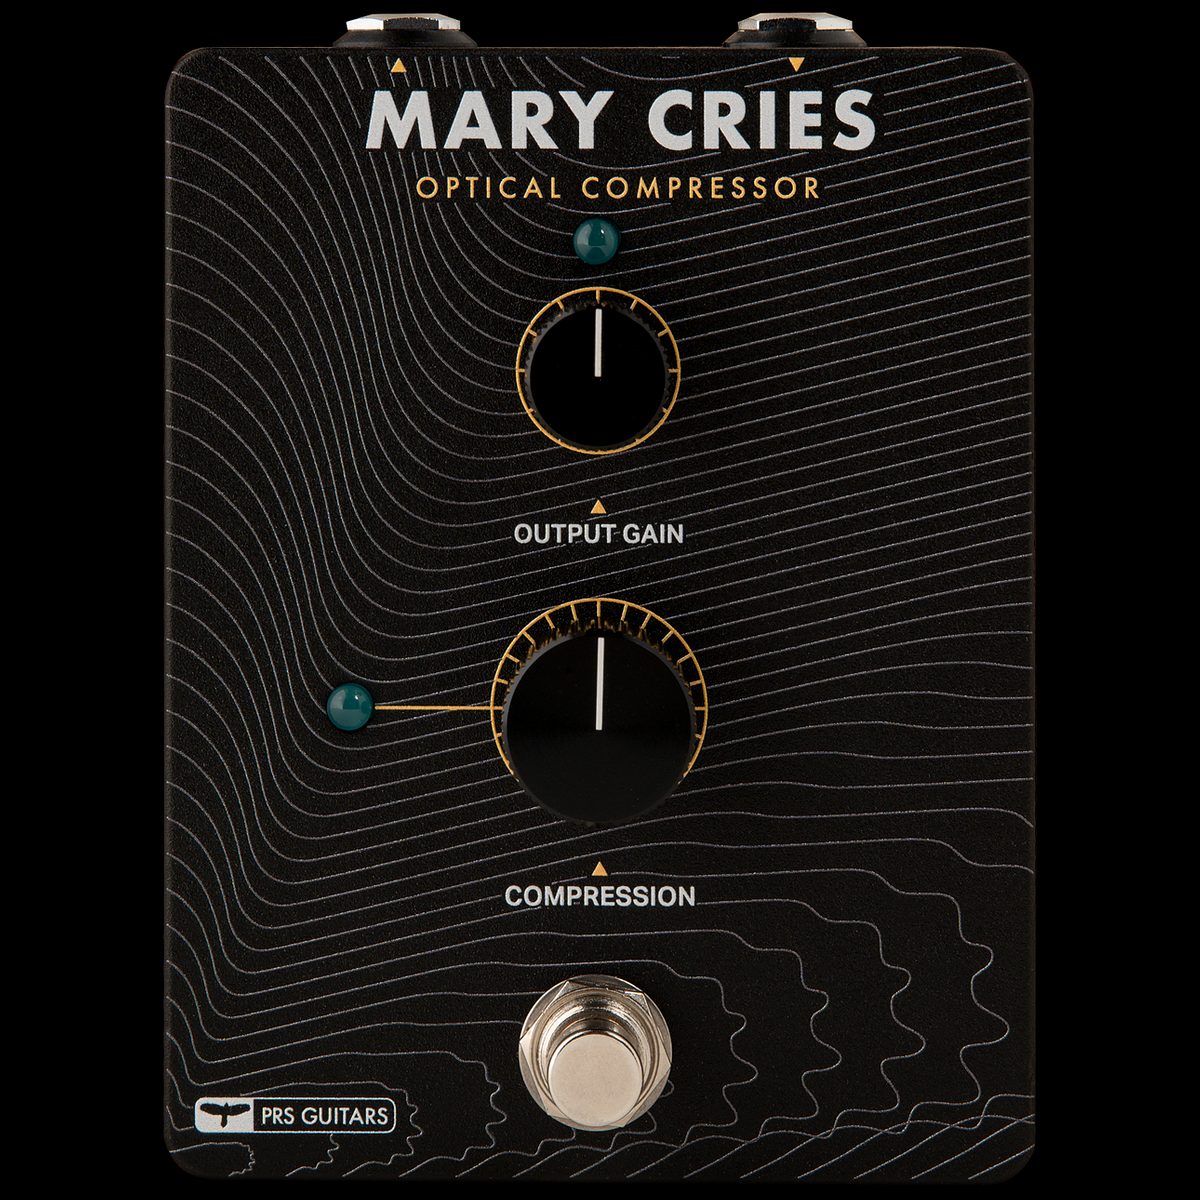 Mary cries top